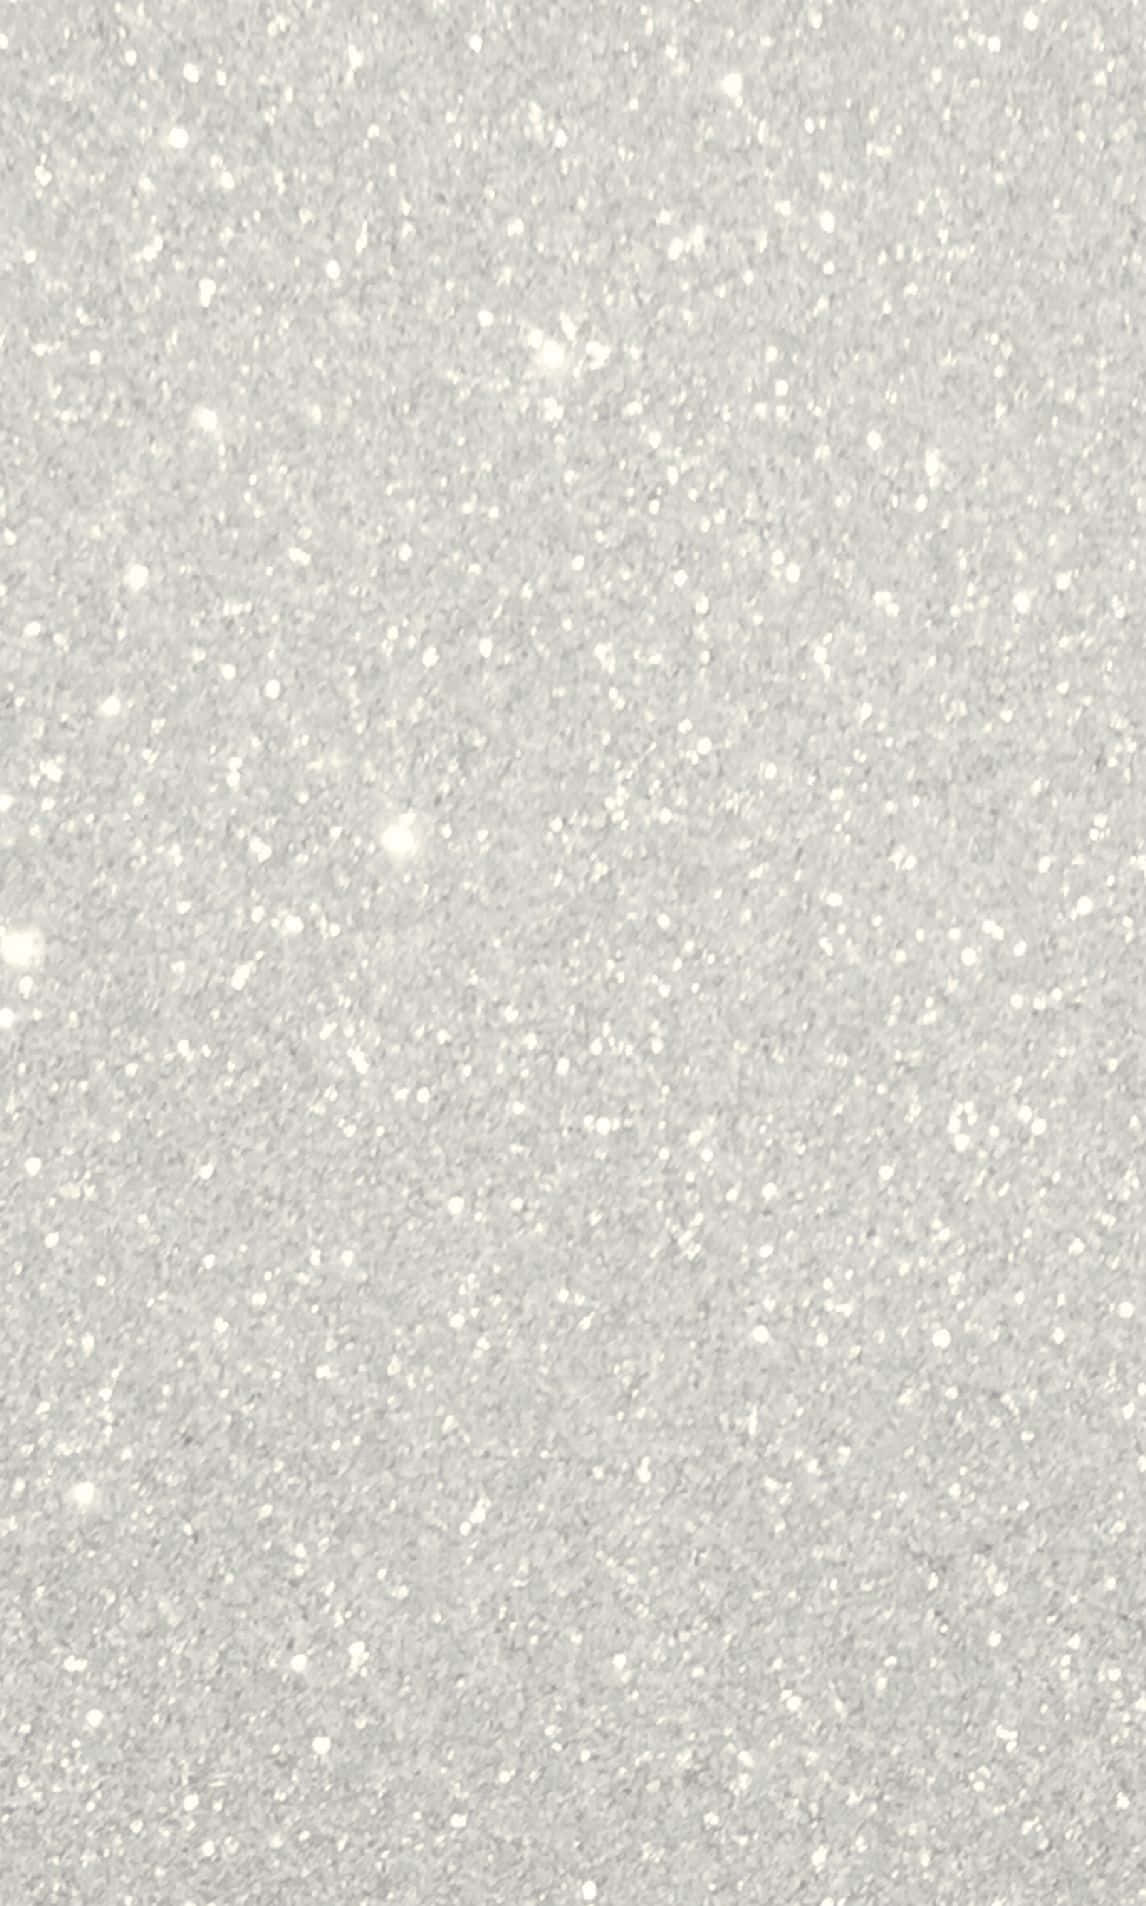 Add some sparkle to your life with our White Glitter! Wallpaper